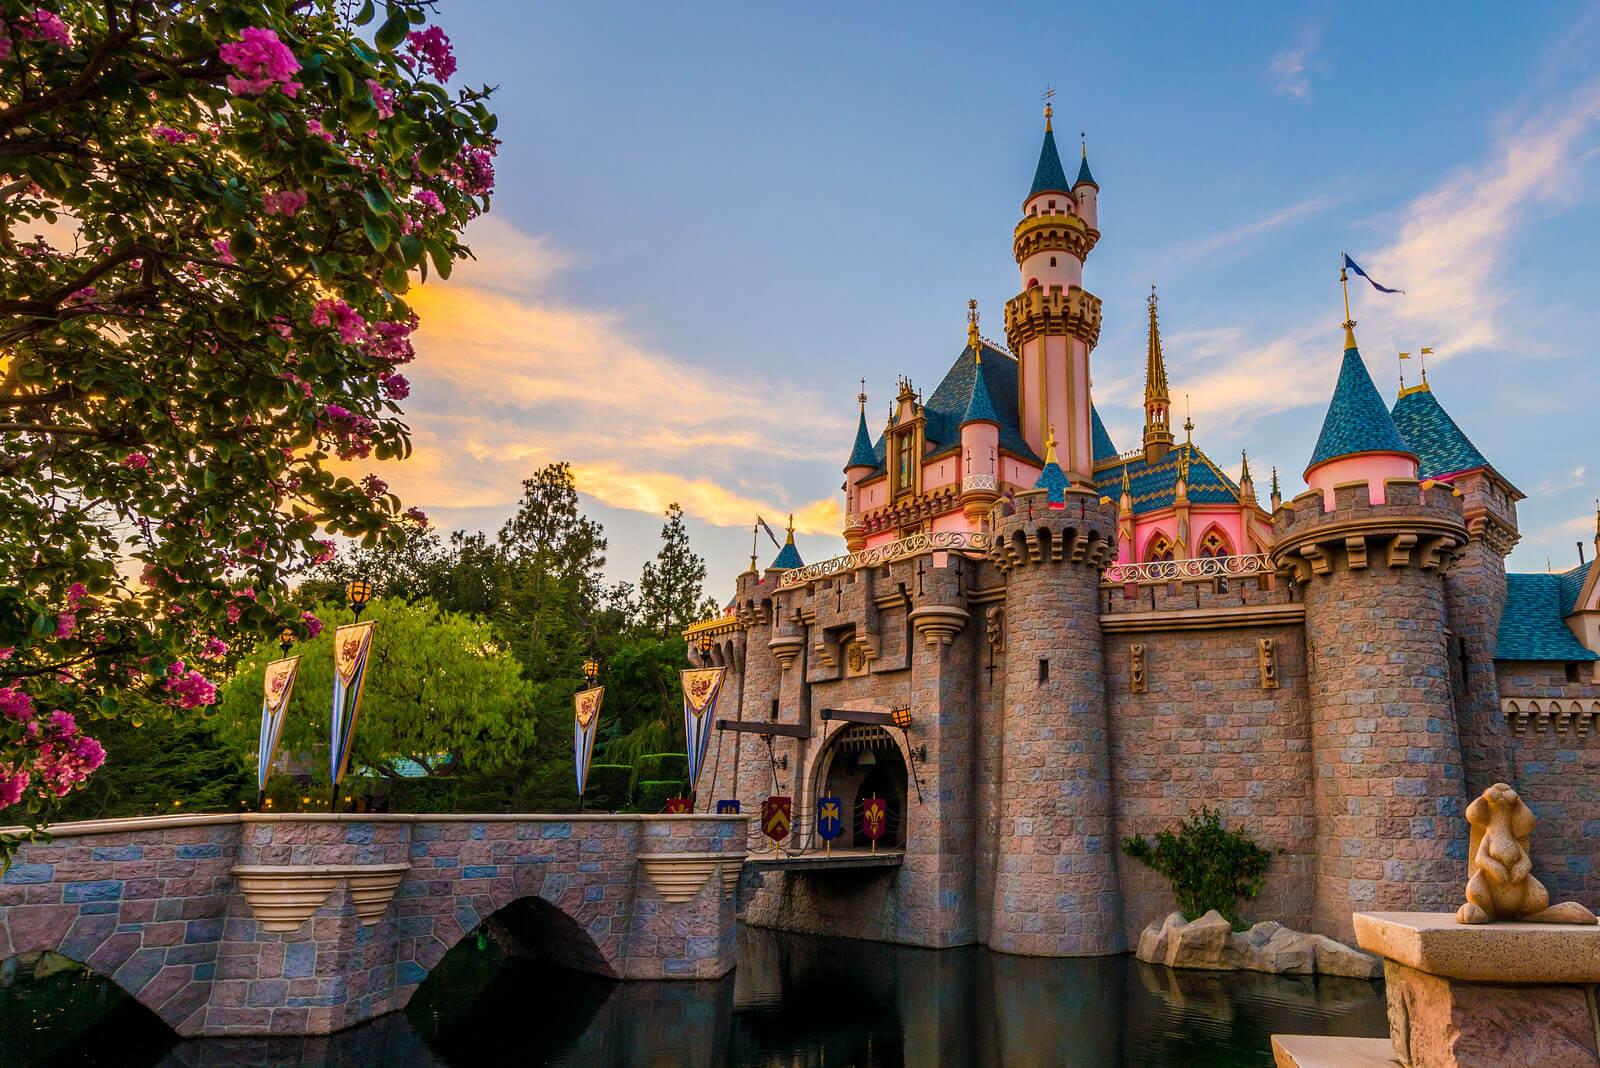 Spend a Day in Disneyland and We’ll Tell You Which Celeb You Are Going With 167